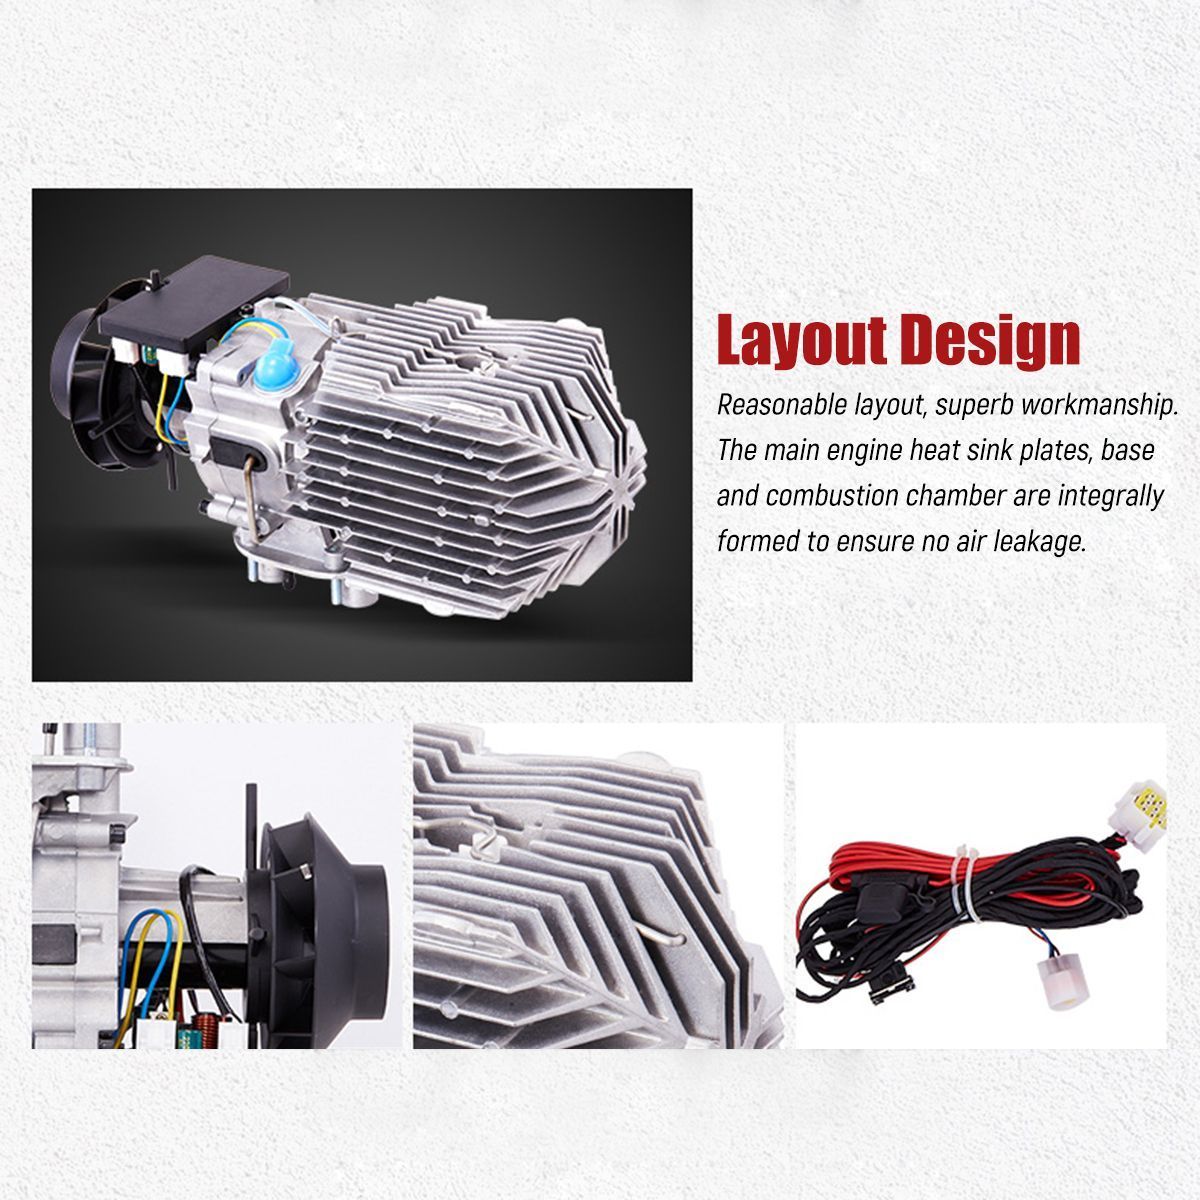 Diesel-Air-Parking-Heater-12V-8KW-With-Remote-Control-LCD-Monitor-For-Car-RV-Trailer-Truck-Boat-1513981